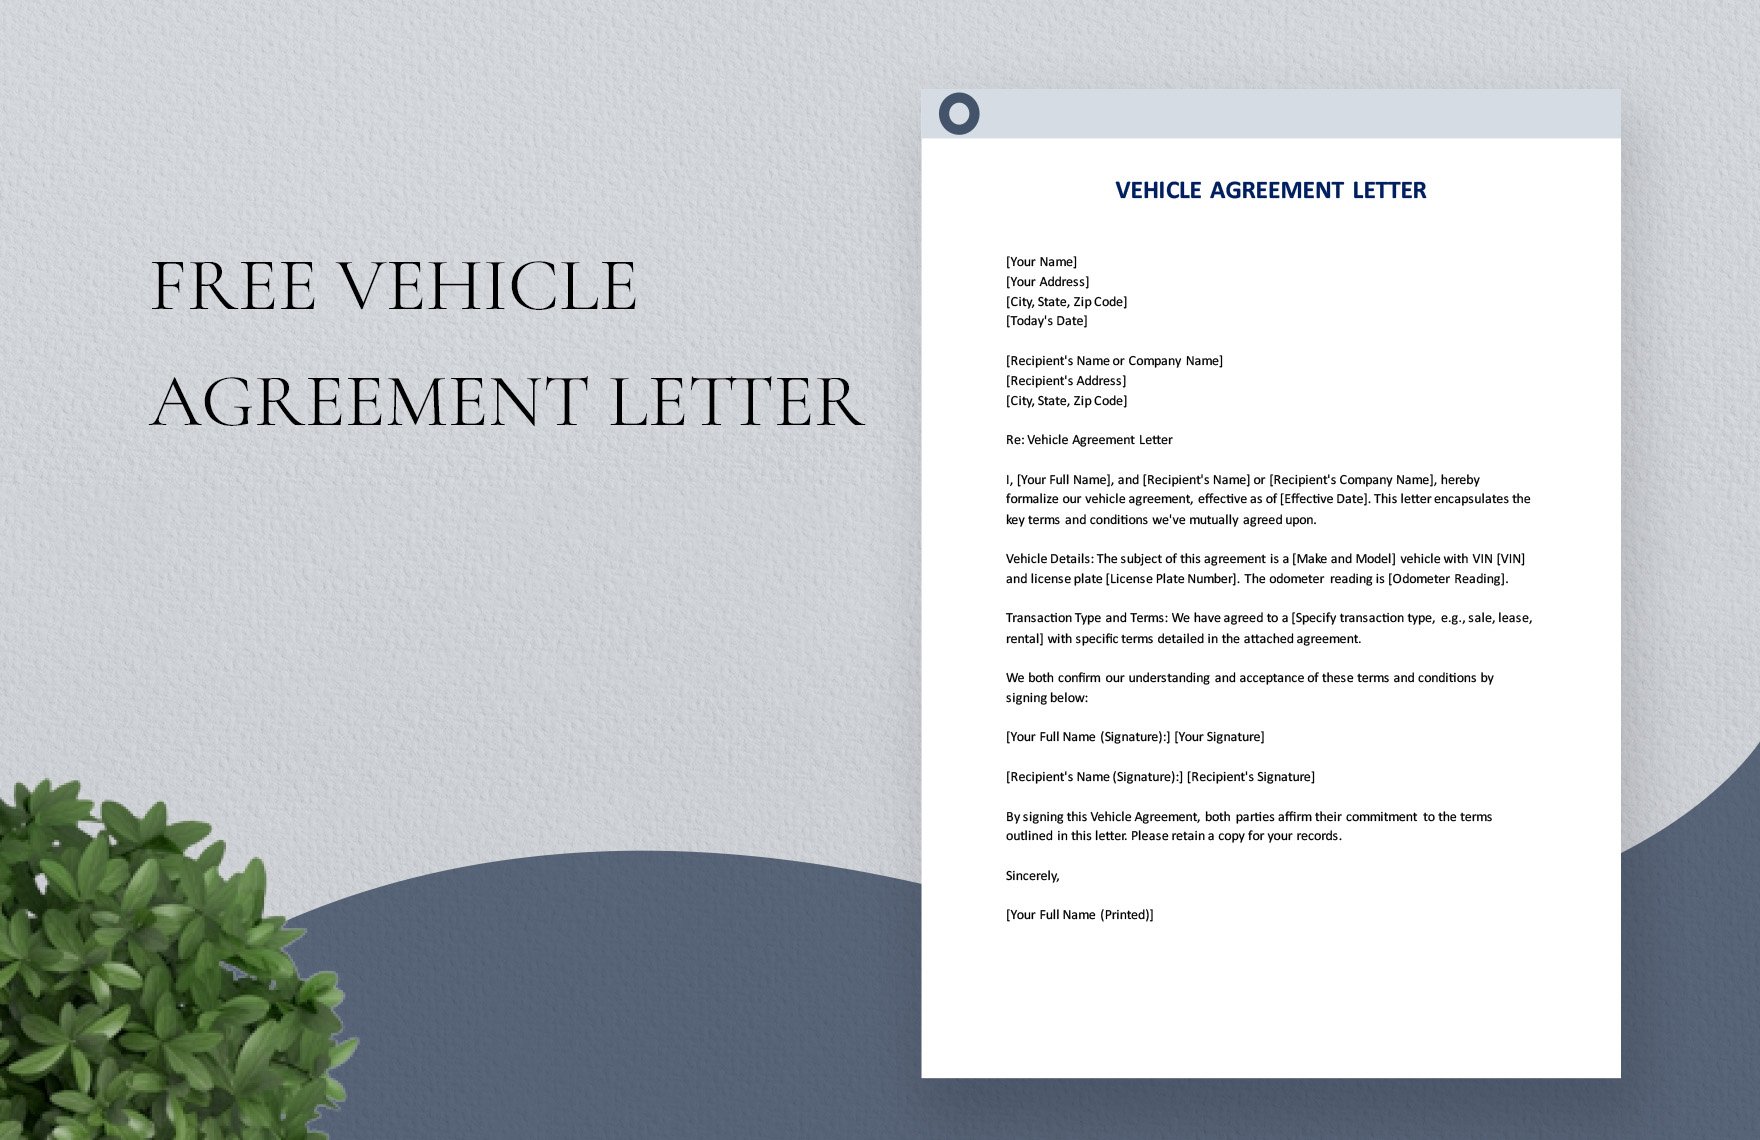 Vehicle Agreement Letter